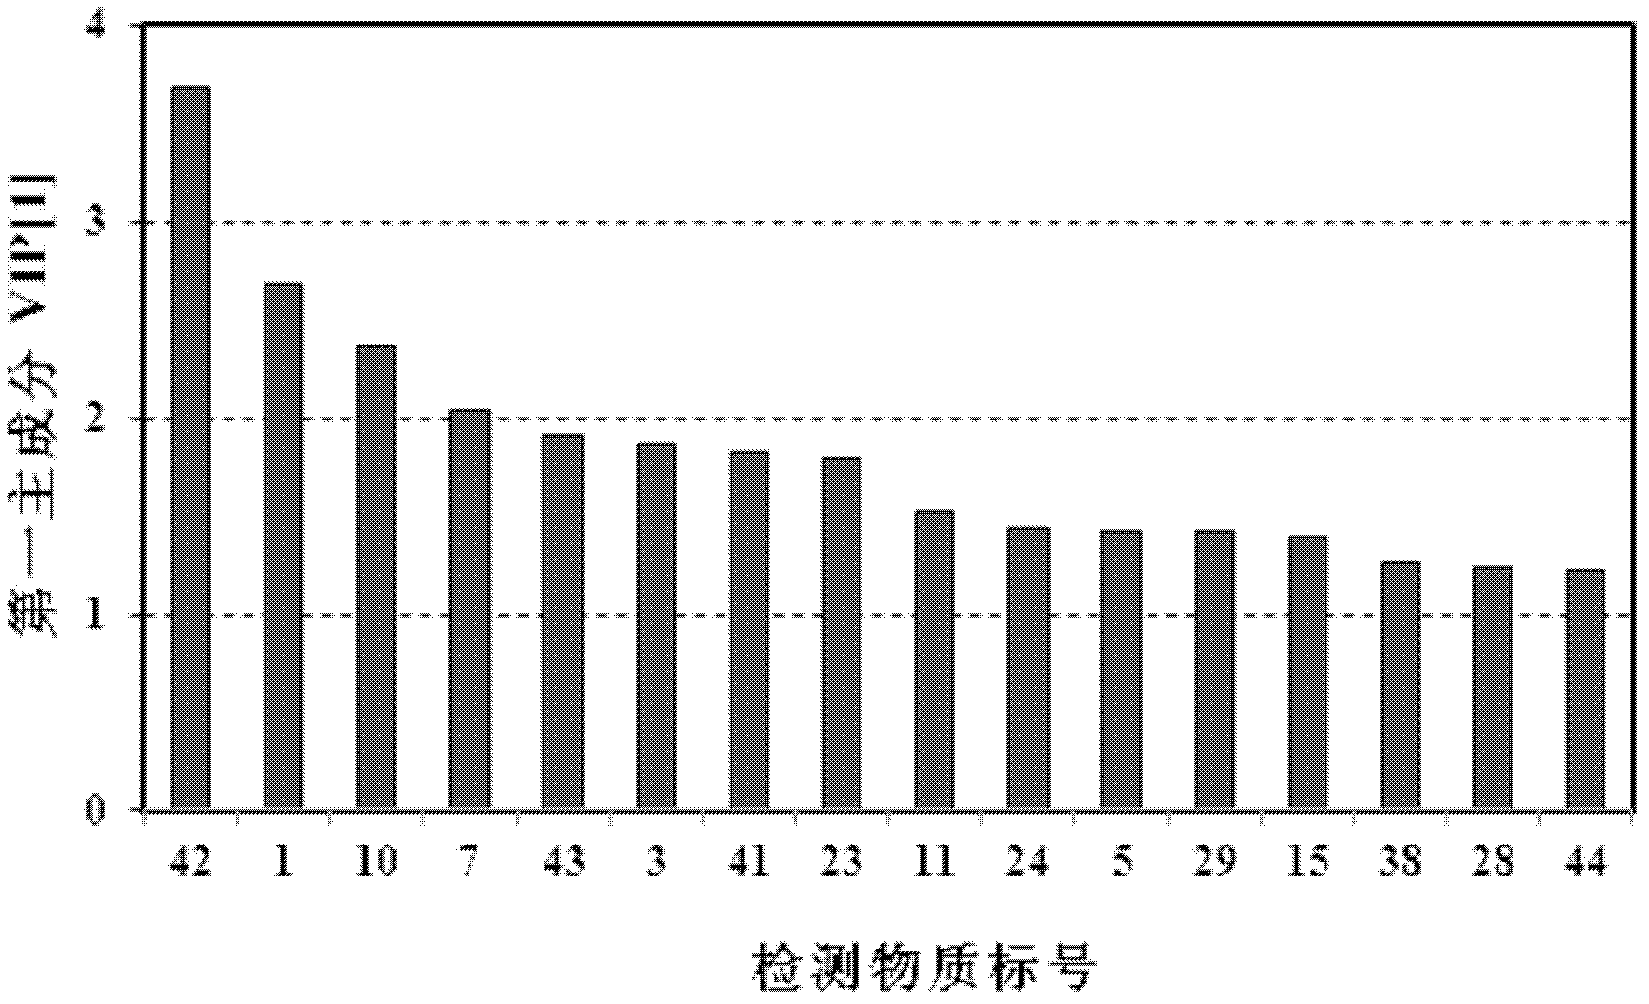 Method for seeking quality control index of raw material corn steep liquor for fermentation